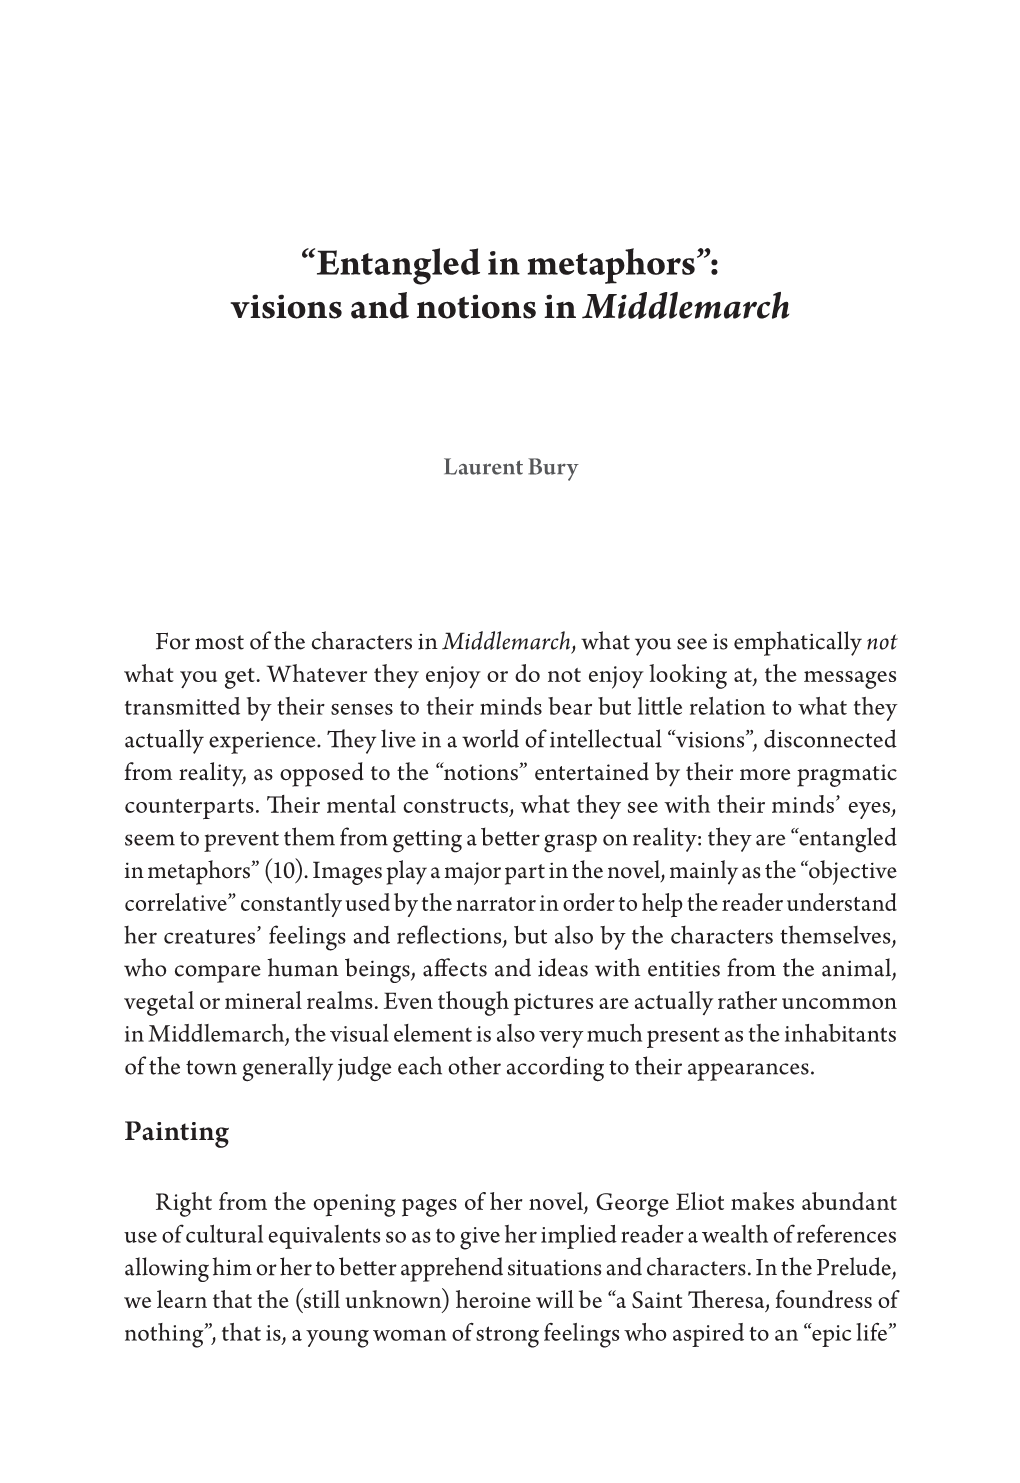 “Entangled in Metaphors”: Visions and Notions in Middlemarch